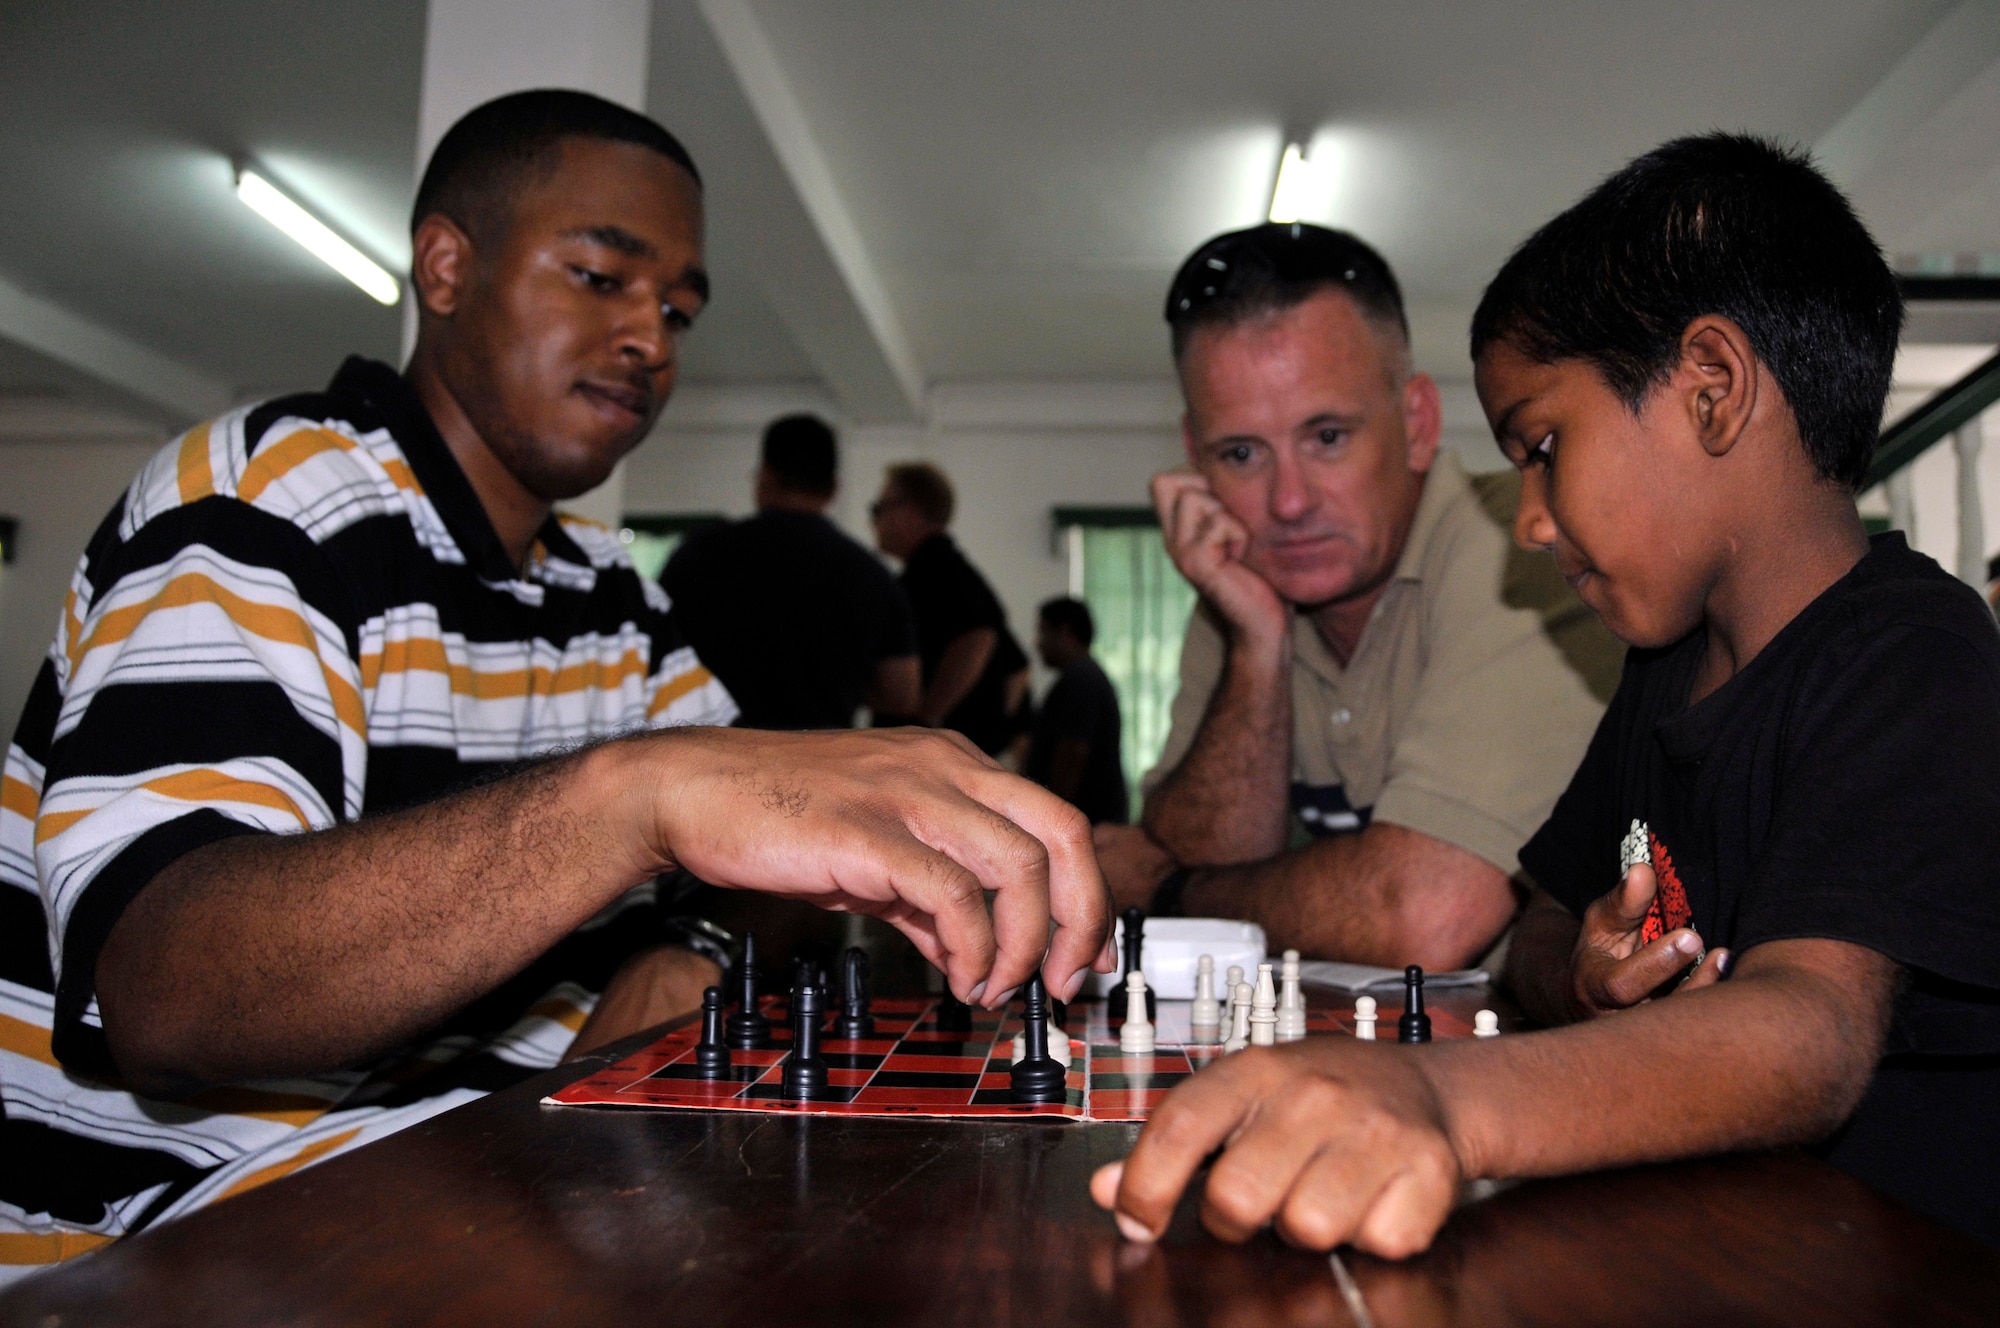 Col. Douglas Galipeau, 474th Air Expeditionary Group Commander watches Sgt. Christopher Still plays chess with a Guyanese boy Aug 20, 2009, at Sad'r Boys Orphanage, Georgetown, Guyana. Col. Galipeau visited two Medical Readiness and Training Exercises, one Dental Readiness and Training Exercise, an orphanage, and two construction projects all part of New Horizons Guyana. (U.S. Air Force photo by Airman 1st Class Perry Aston) (Released)